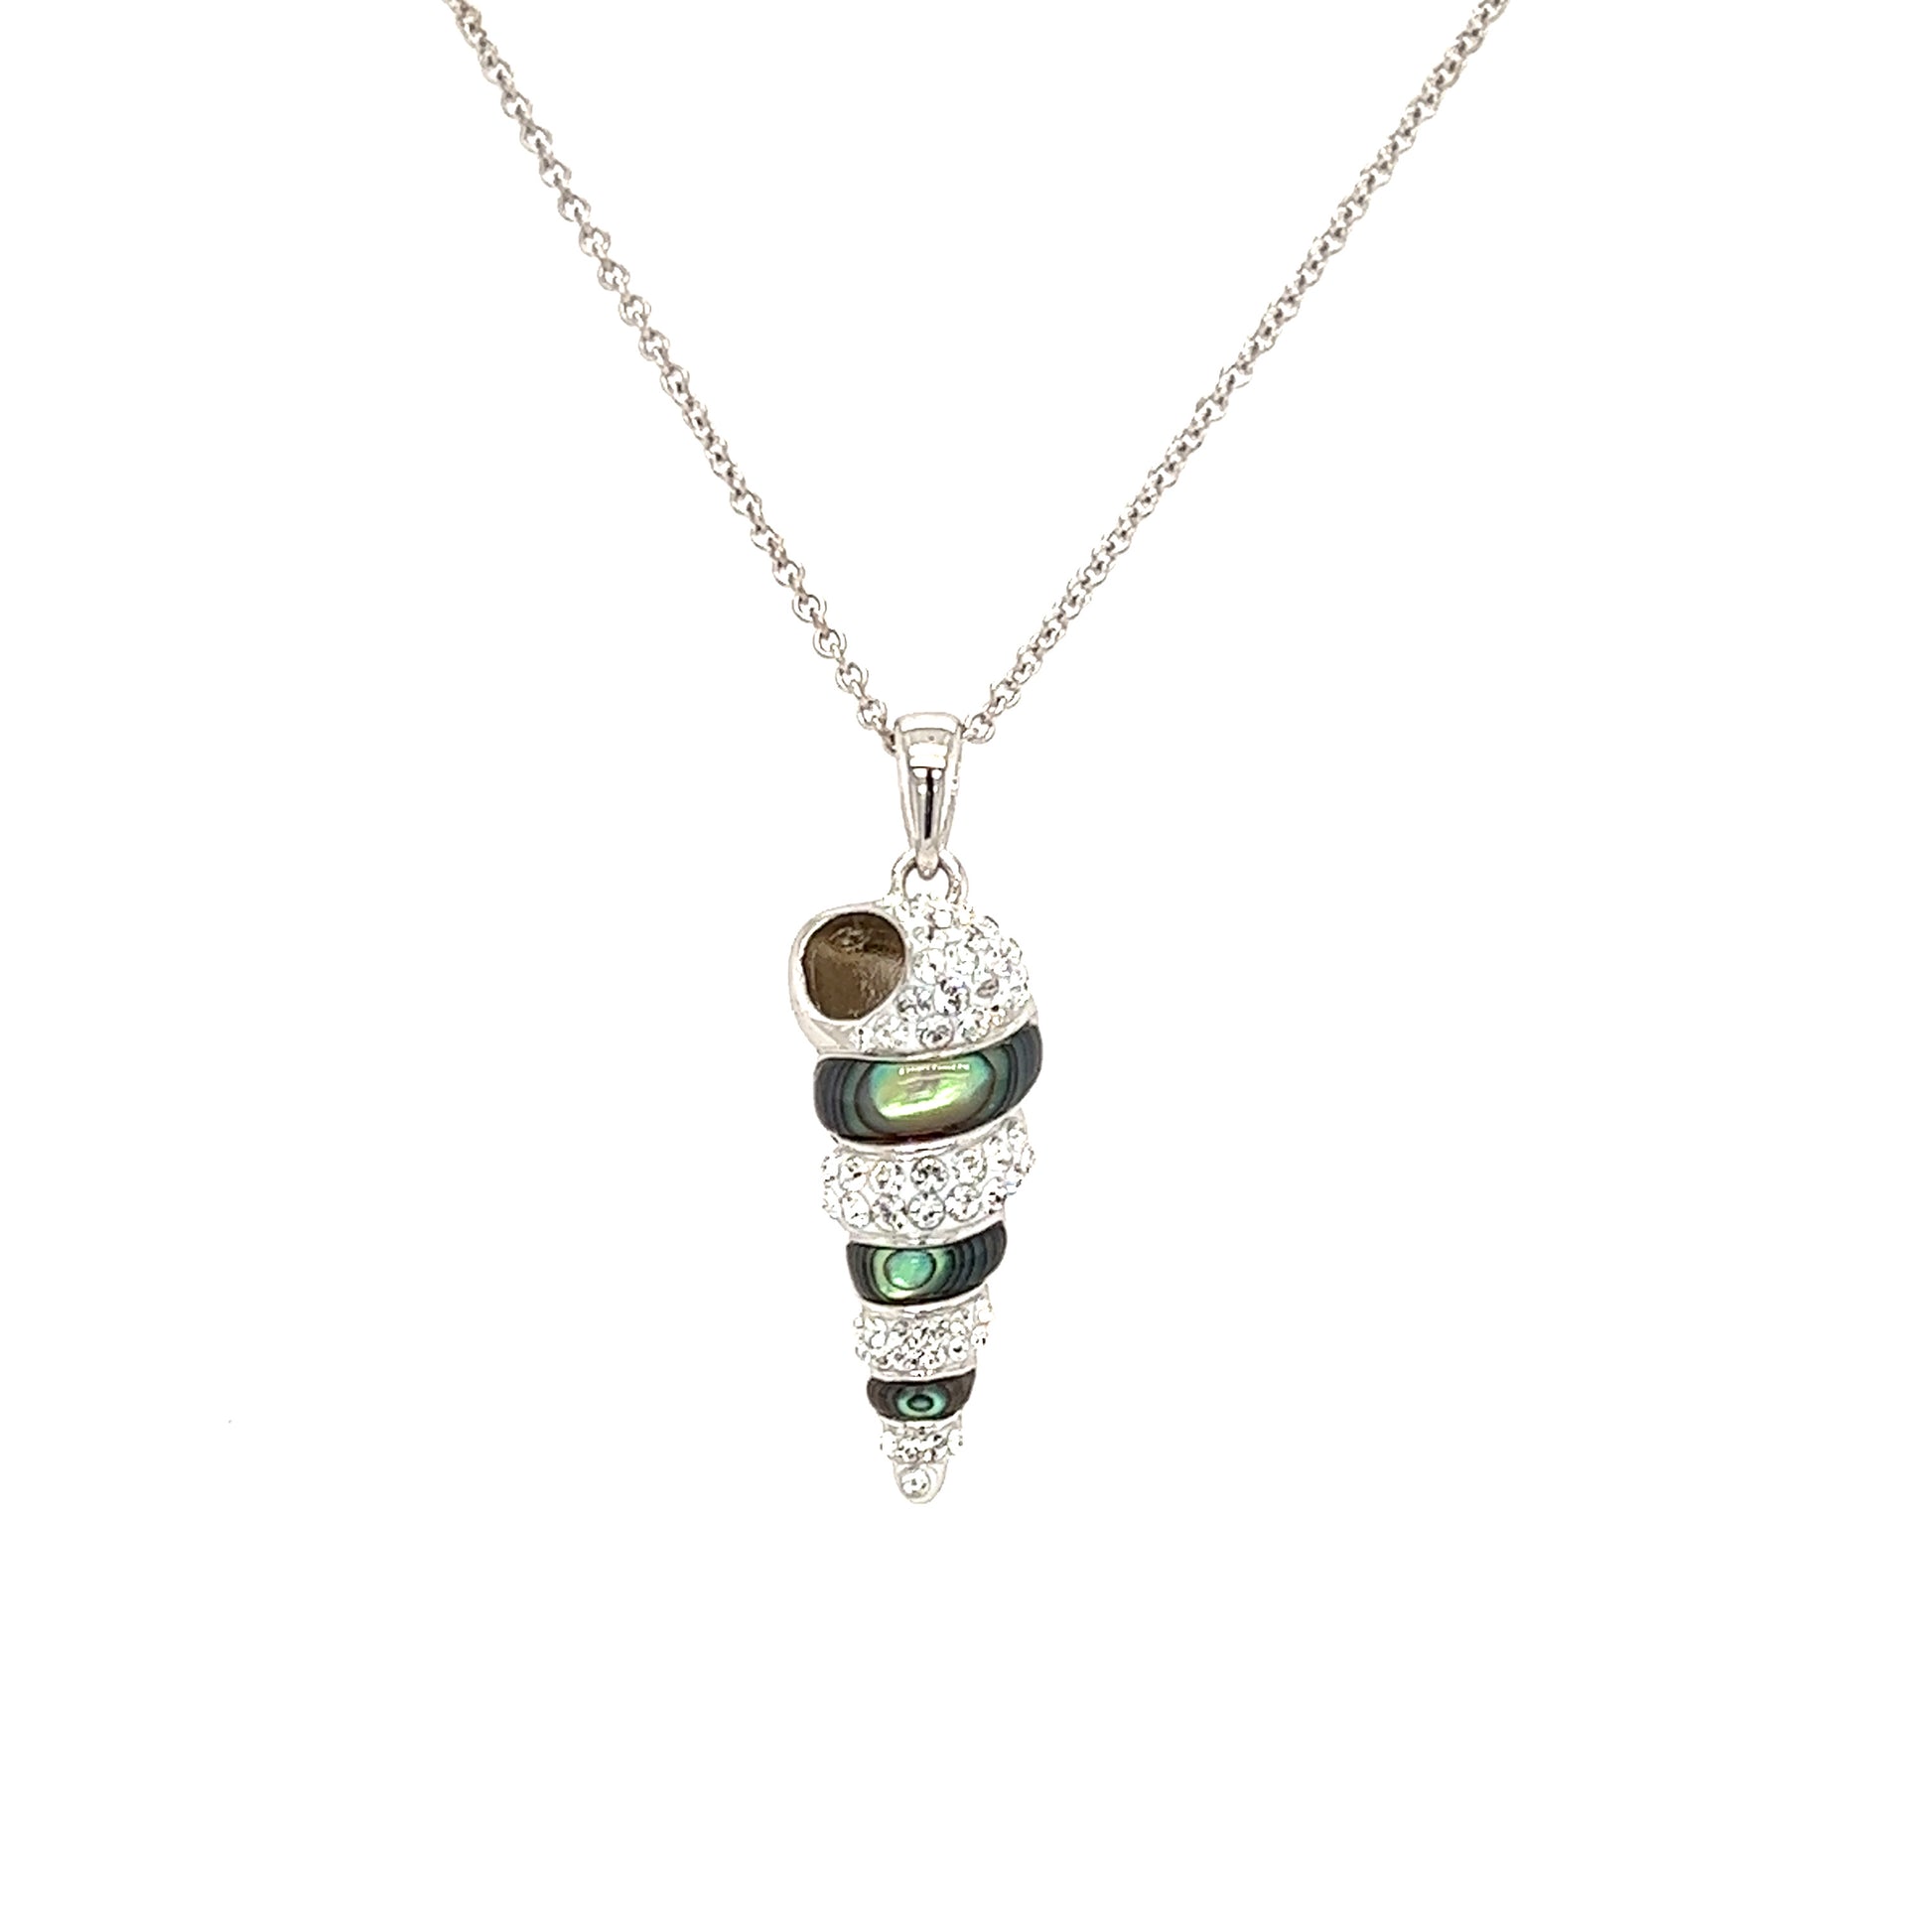 Abalone Shell Necklace with Swarovski Crystals in Sterling Silver Front View